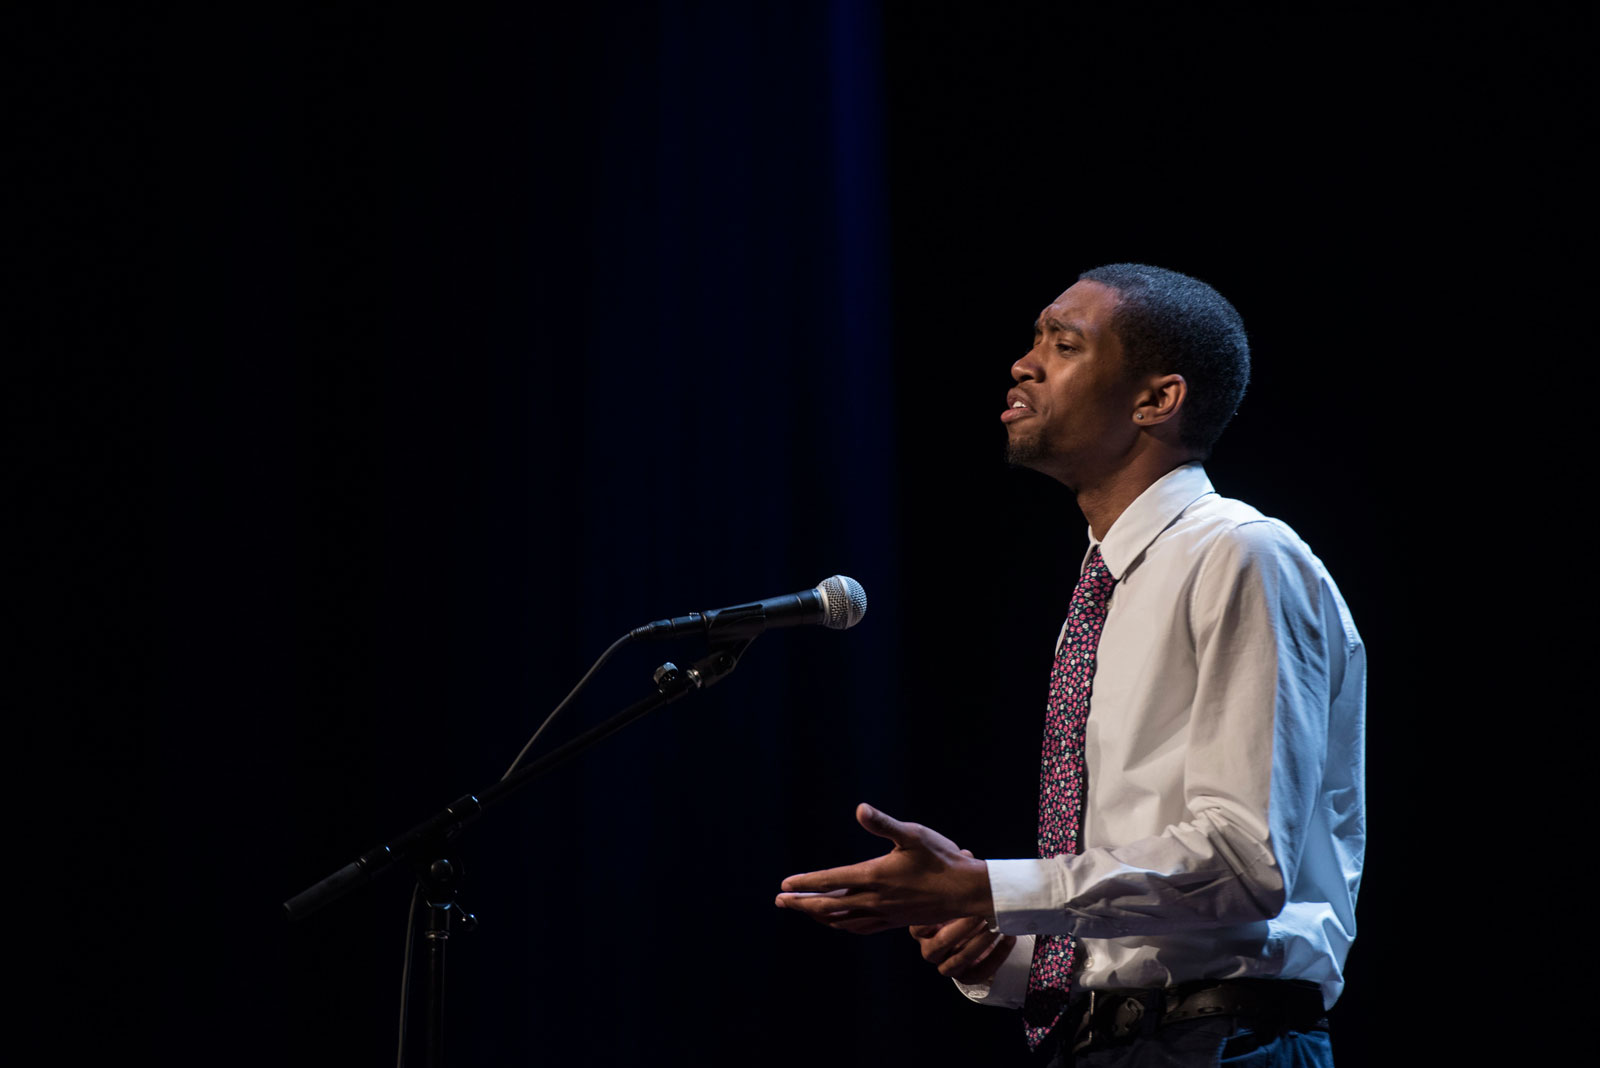 Virginia Beach teen wins big at national poetry competition